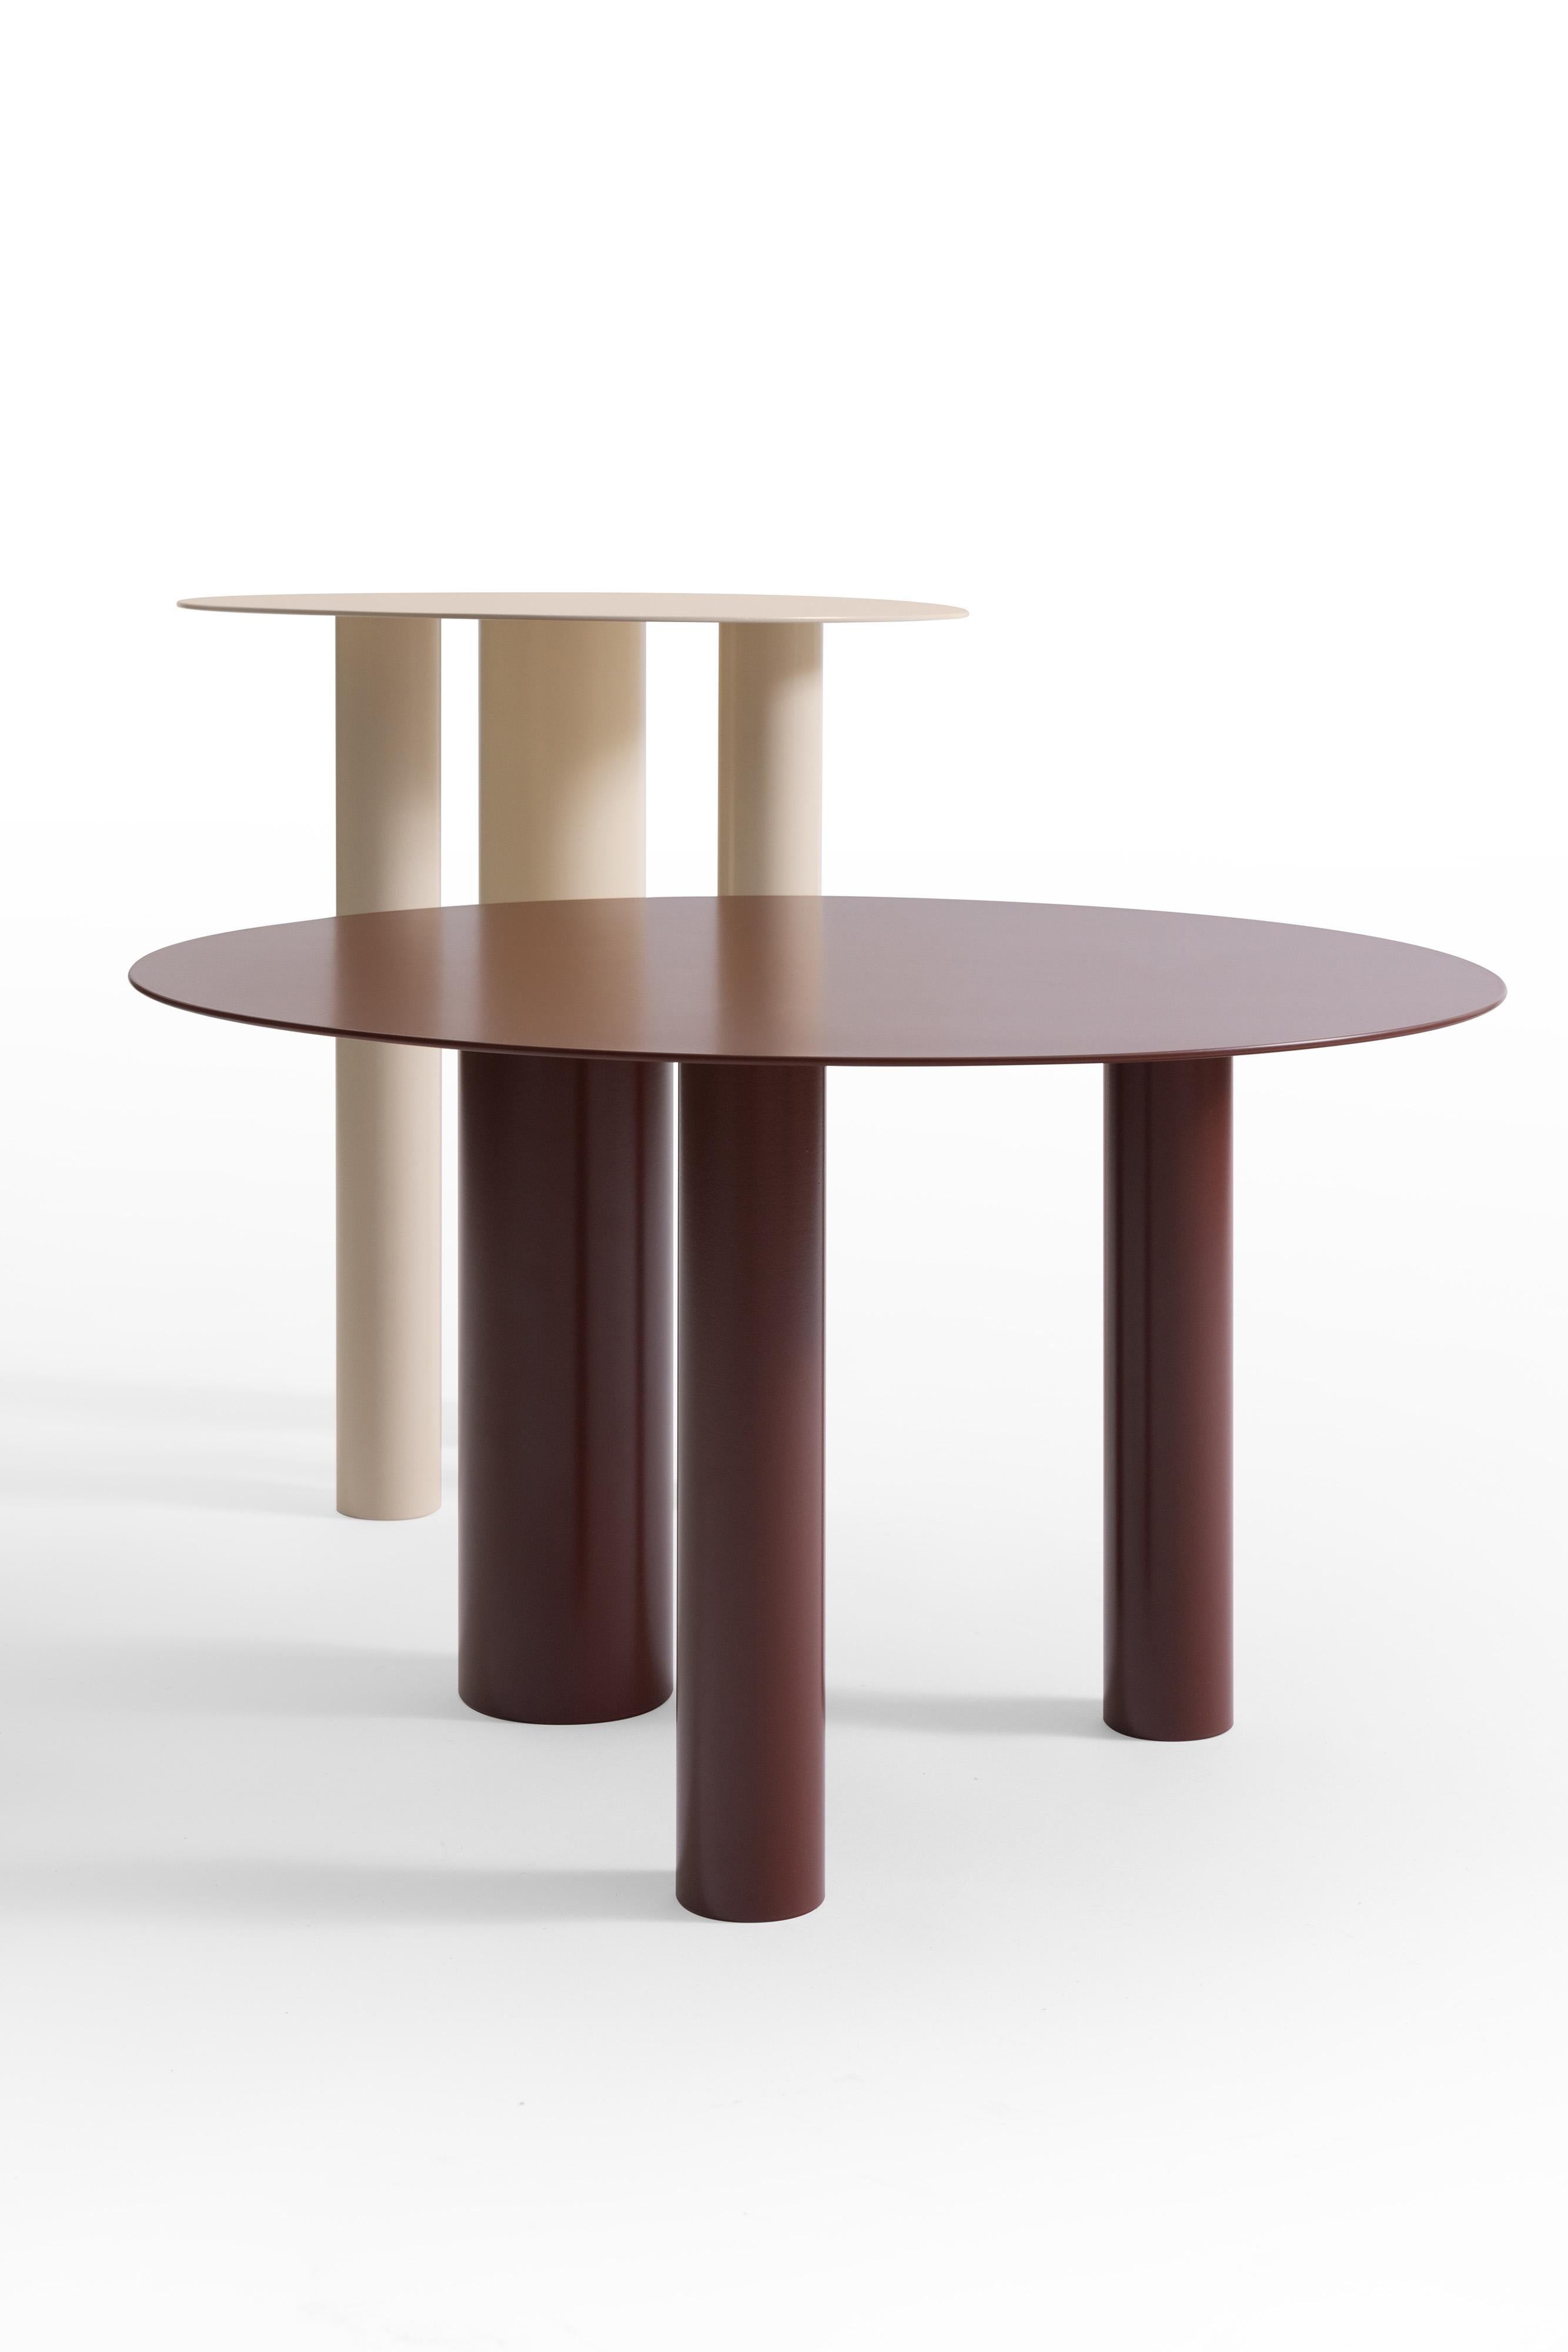 High Coffee Table Brandt CS2 Made of Painted Steel by Noom 2